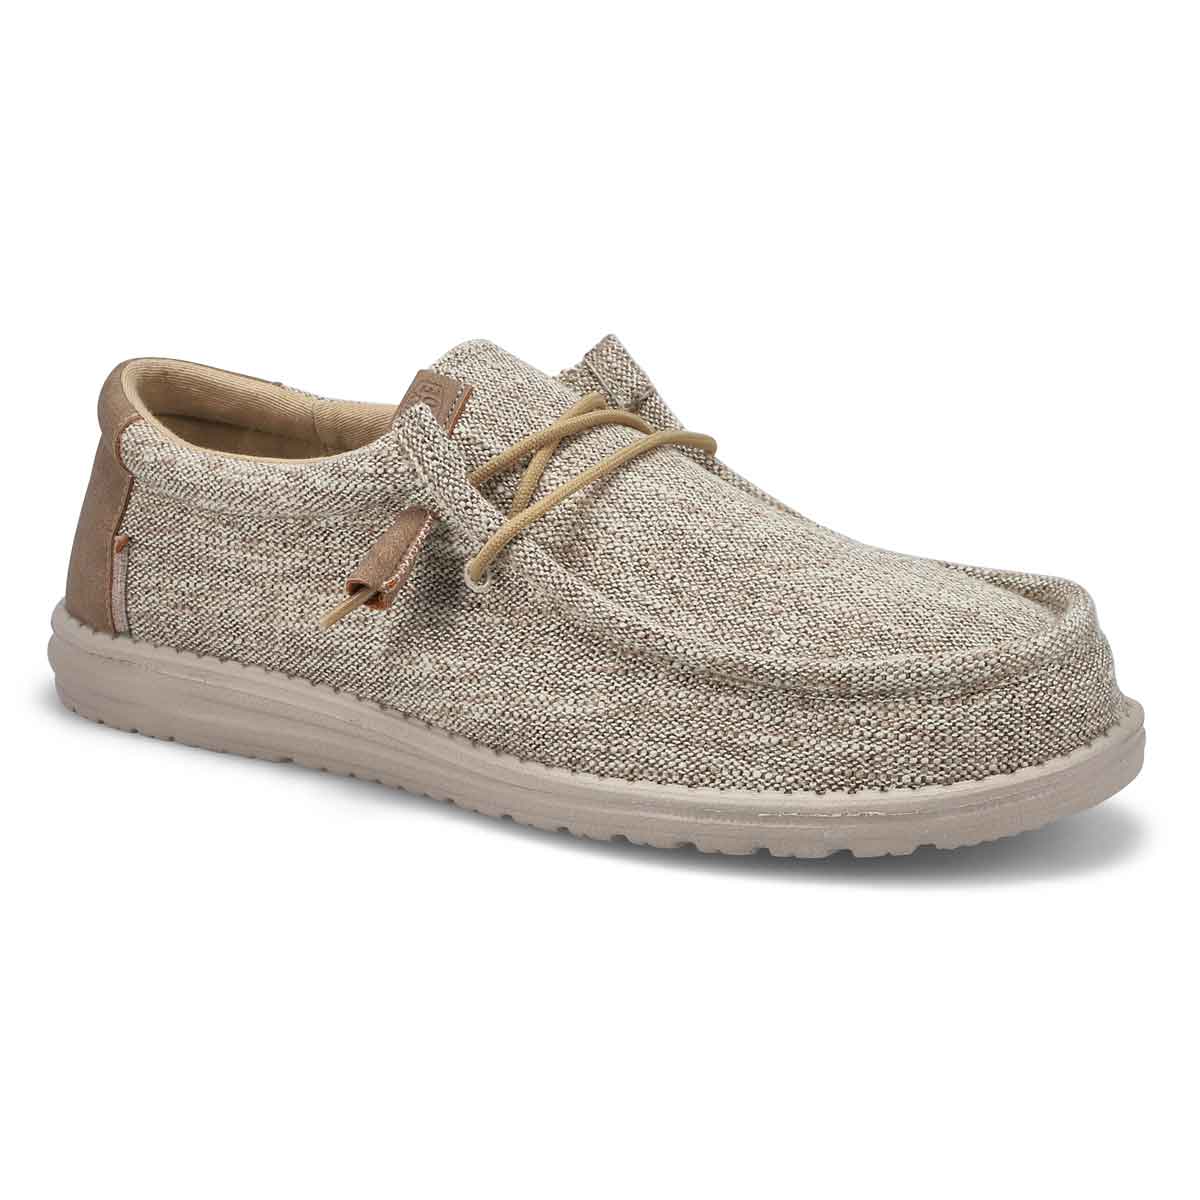 HEYDUDE Men's Wally Ascend Casual Shoe - Abys | SoftMoc.com